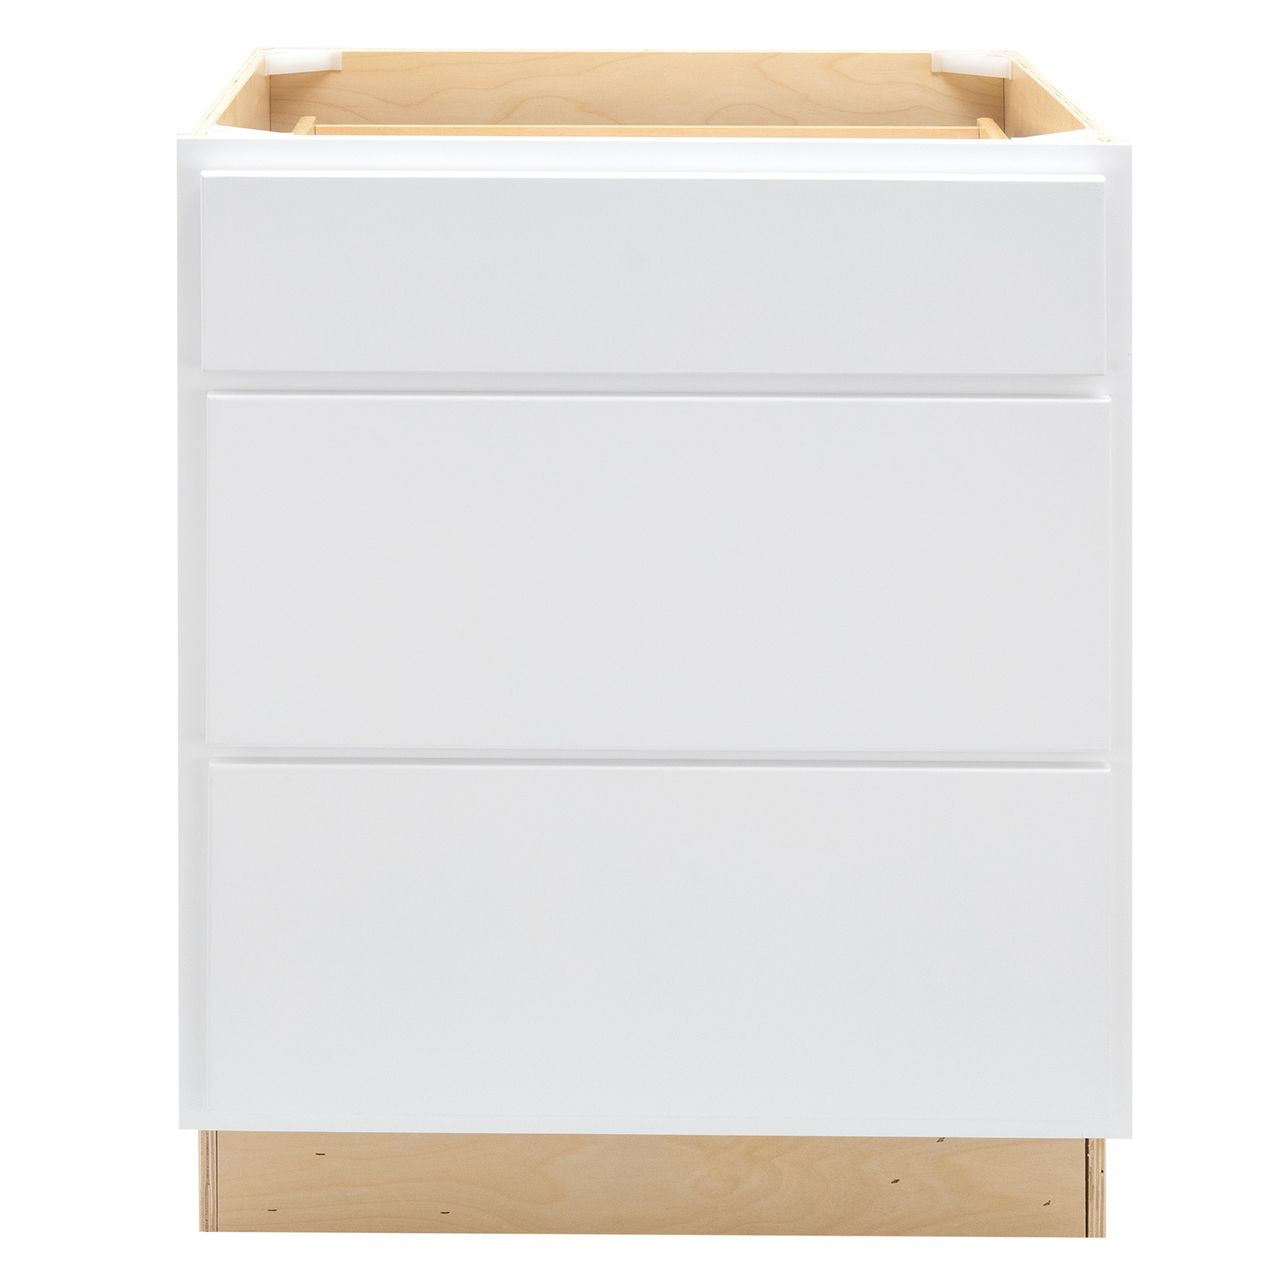 Quicklock RTA (Ready-to-Assemble) Pure White 3 Drawer Pots and Pans Base Cabinet- Large (30", 36"W)